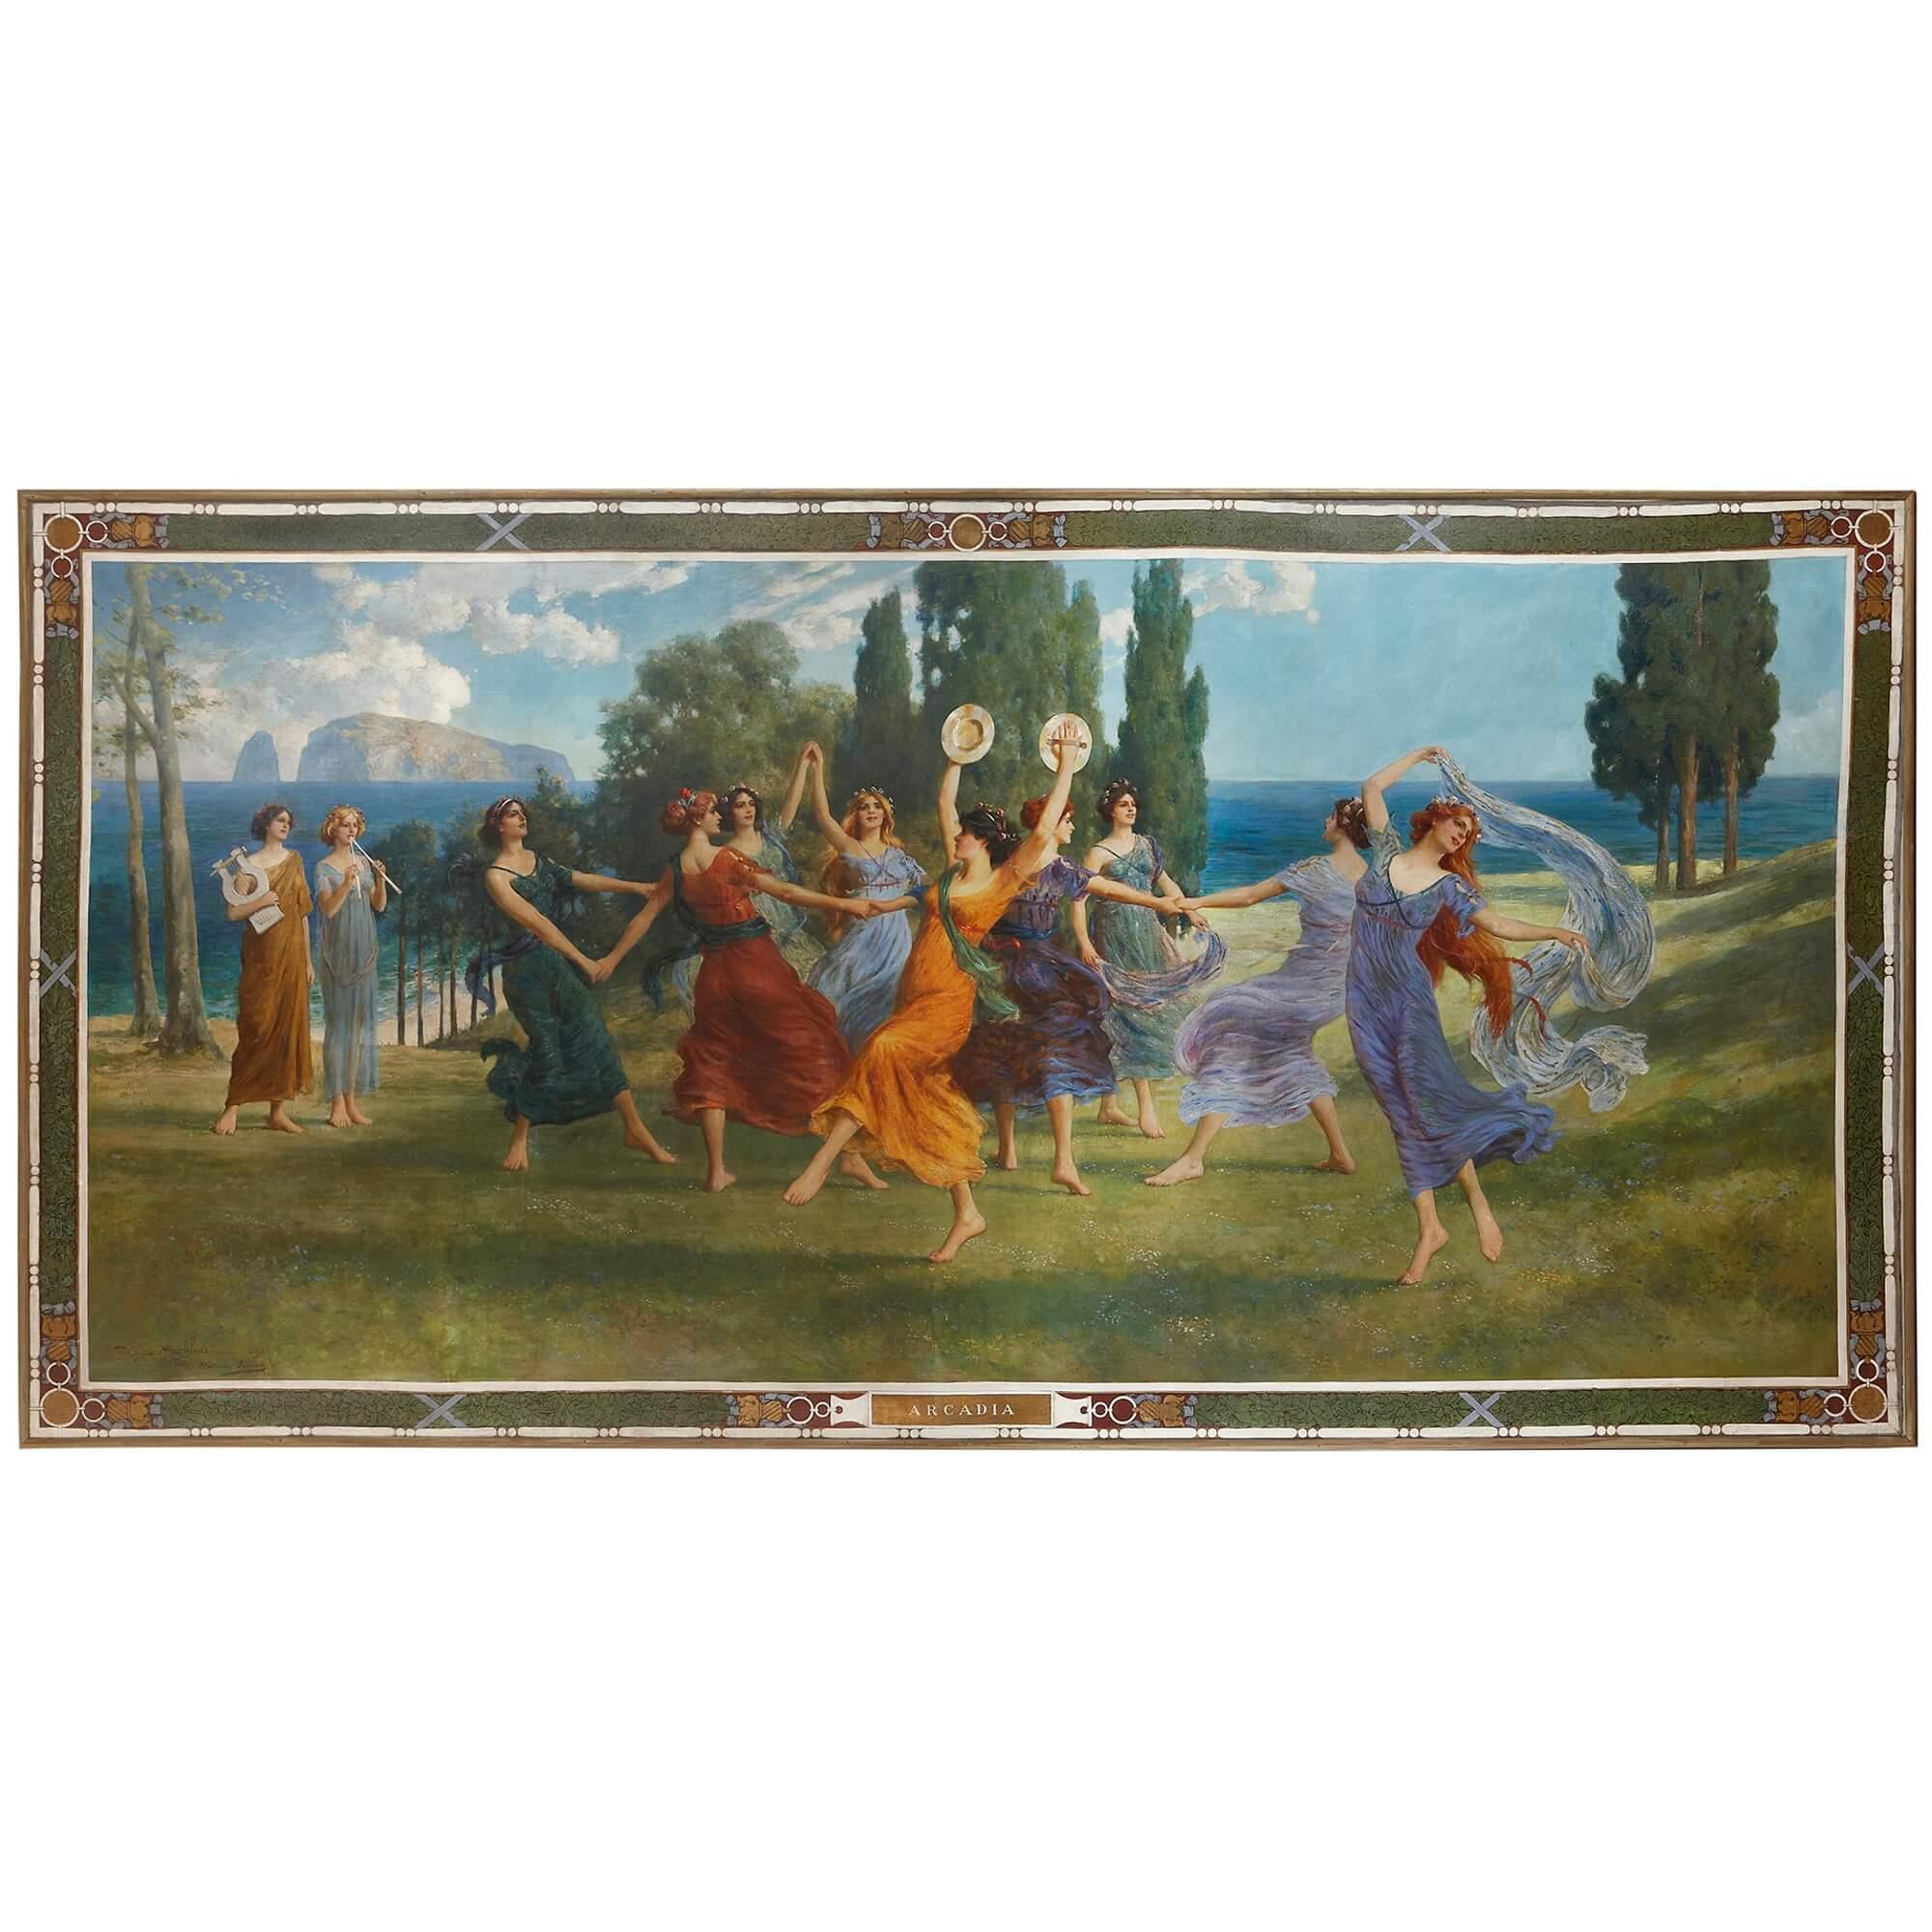 'Arcadia, ' a very large British Neoclassical Arts & Crafts painting